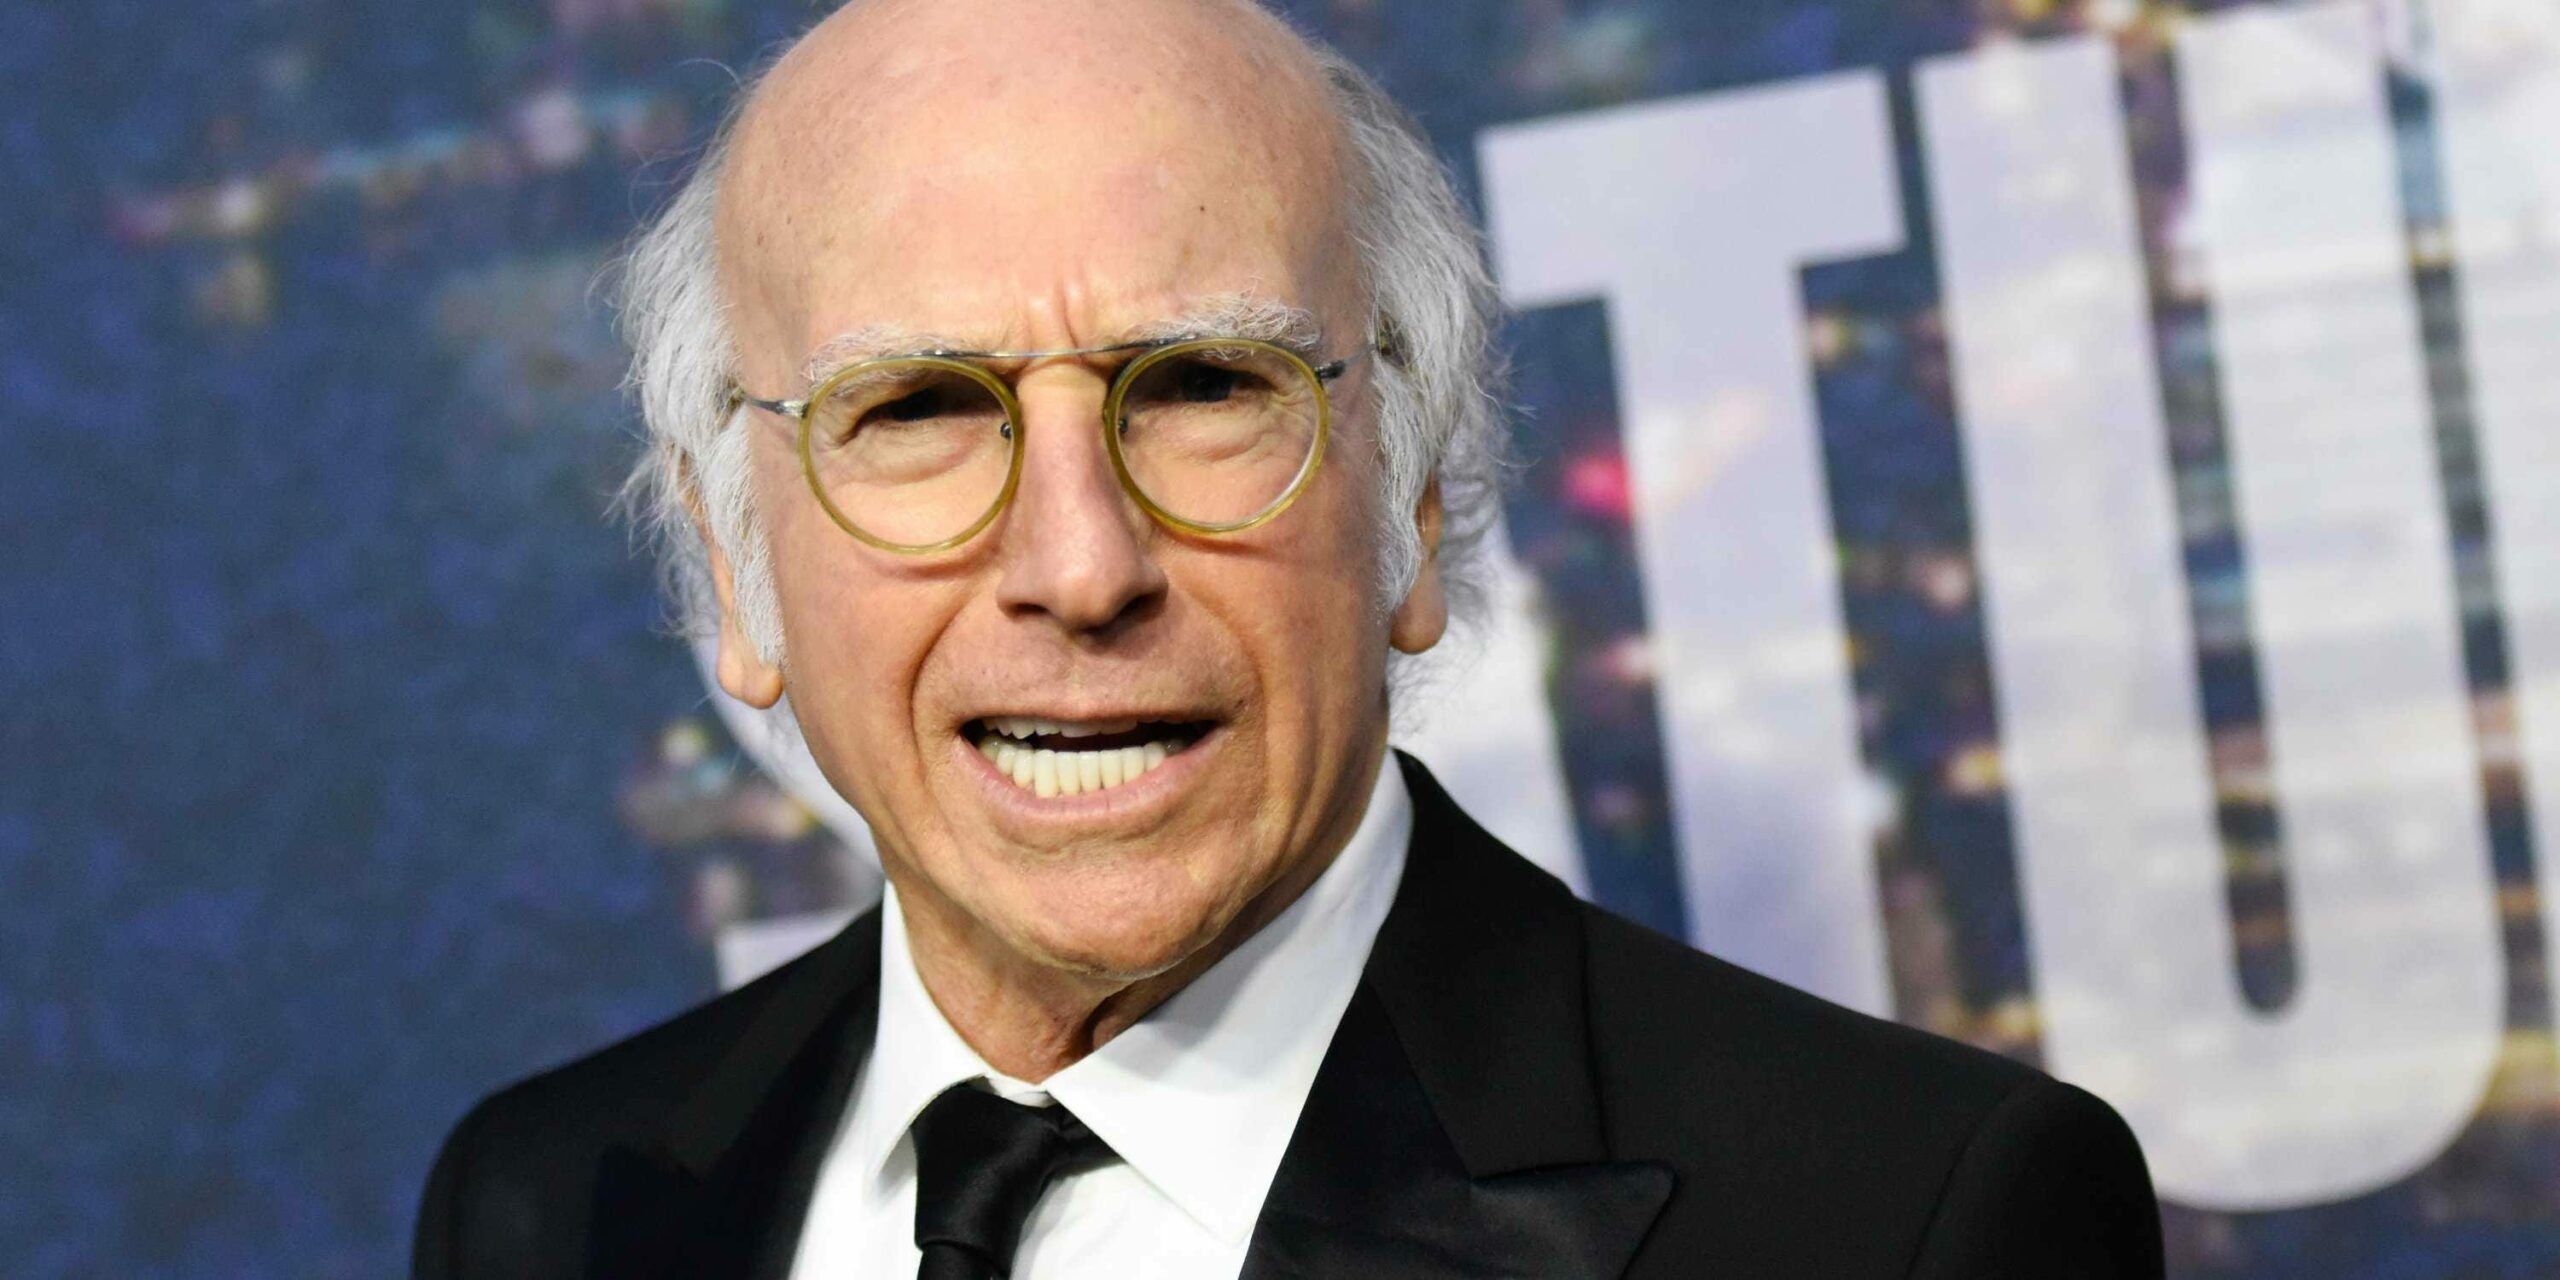 What is Larry David's net worth?